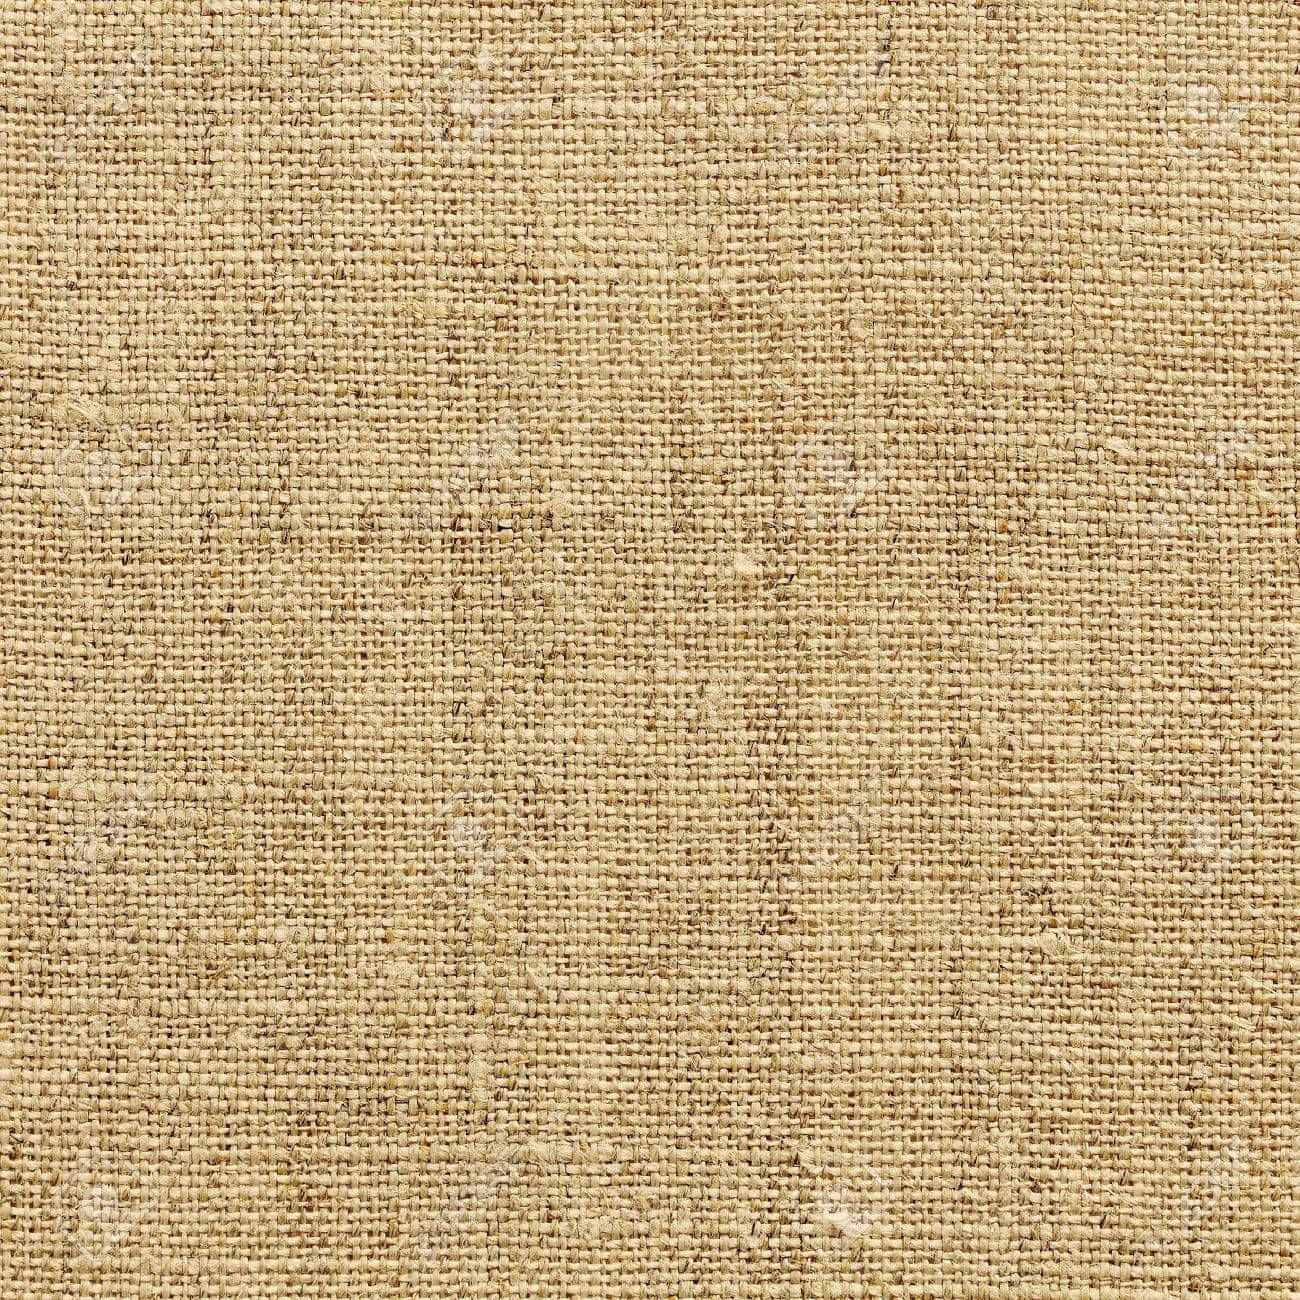 A stylish linen background perfect for any project.